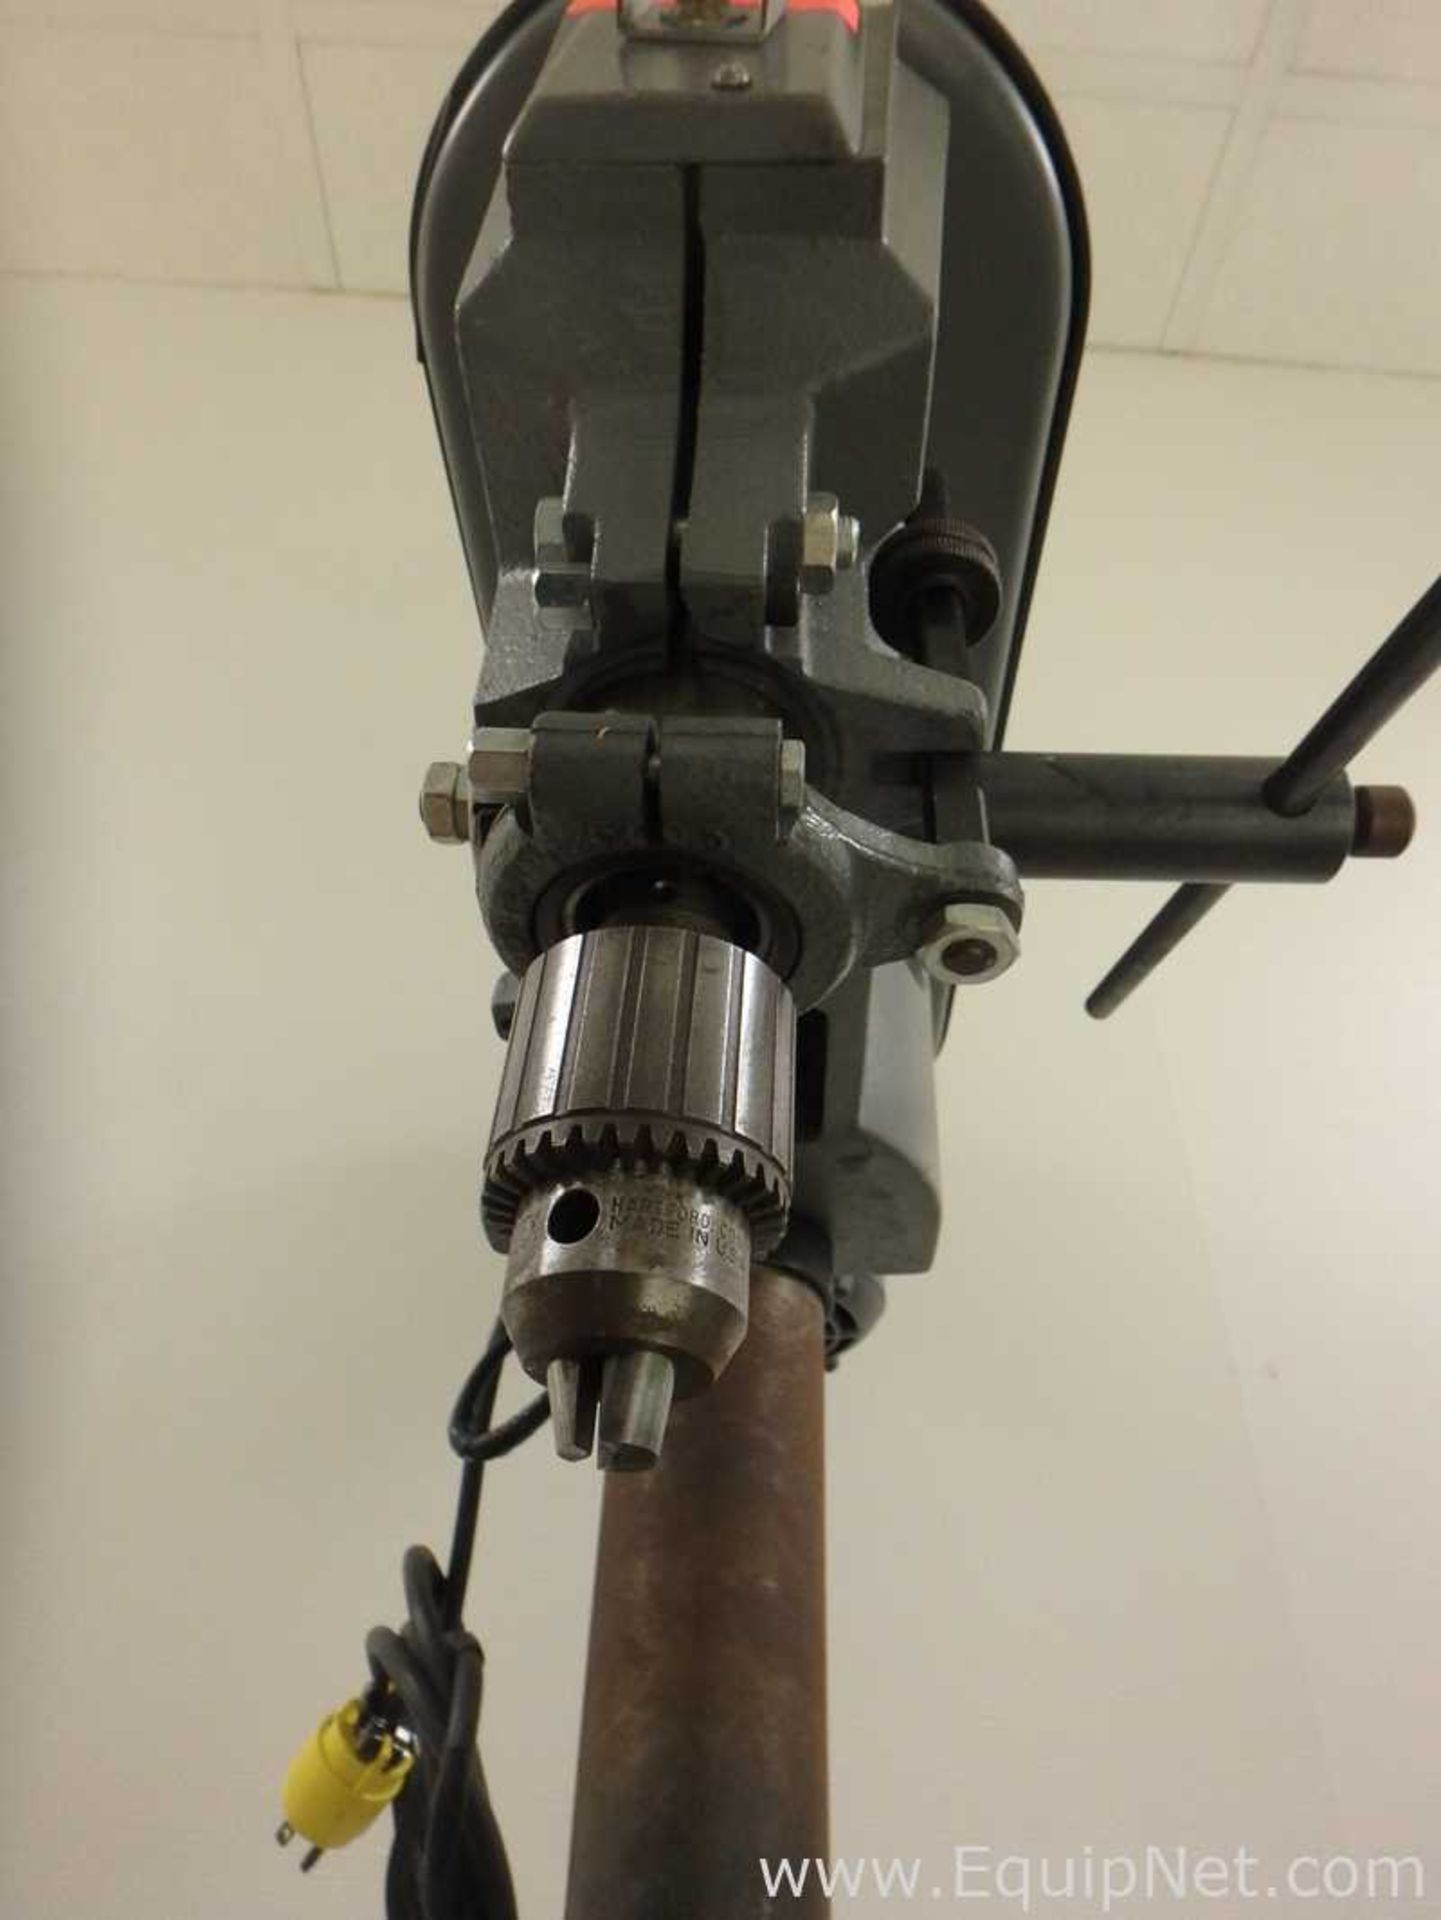 Rockwell Automation 15-081 Drill Press - Image 3 of 6